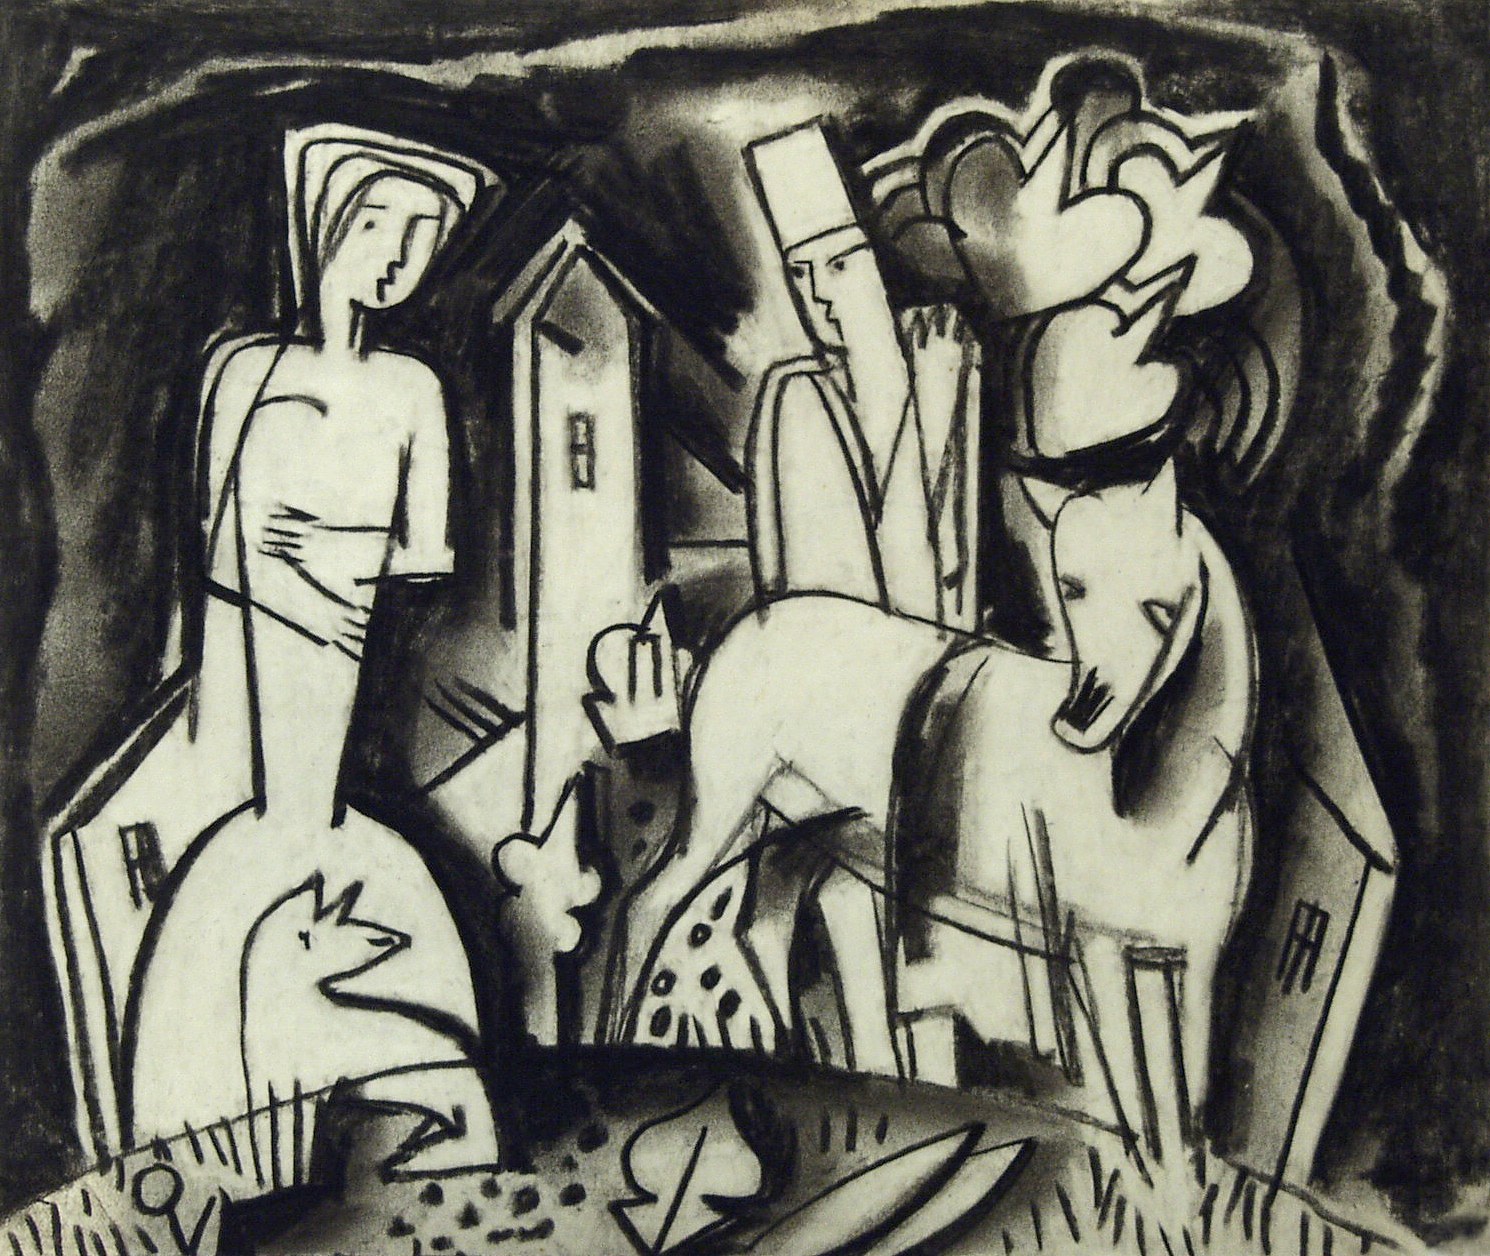 Bela K&aacute;d&aacute;r, Untitled (man behind horse, with woman), n.d., charcoal on paper, 6 7/8 x 8 1/8 inches